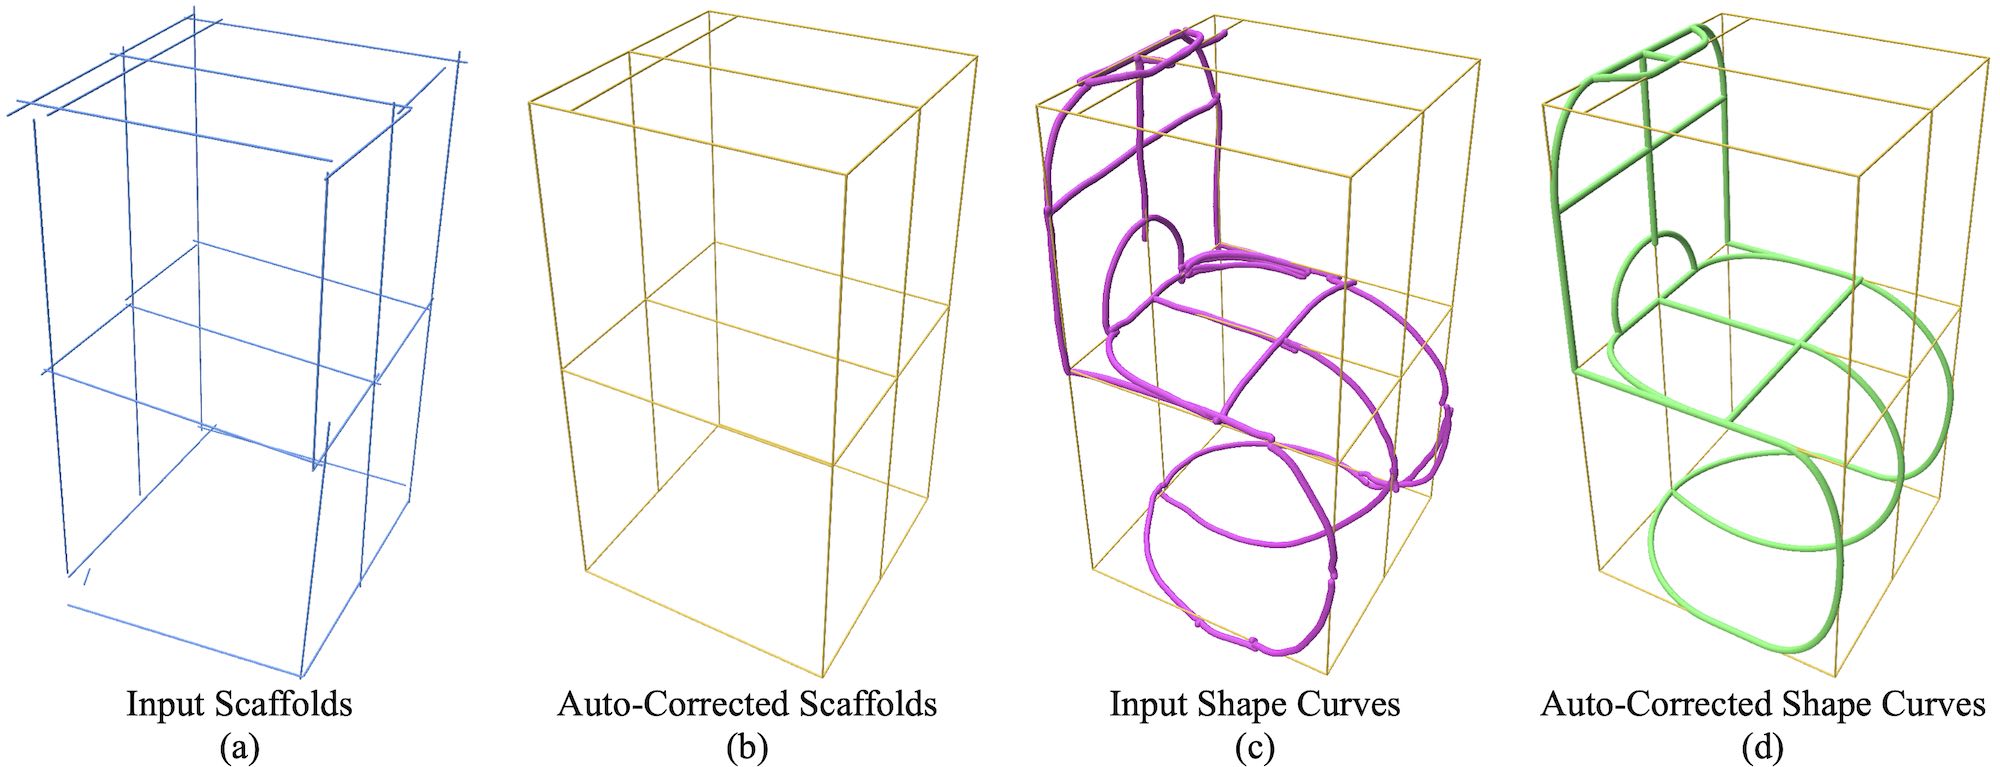 A wireframe chair drawn with scaffolds lines and shape strokes. There are four subfigures. The first shows the user input scaffold lines. The lines are drawn inaccurately. They loosely follow the edges of a box with additional lines dividing the box into regions, but they don't meet precisely at their ends. The second shows the auto-corrected scaffold lines, which do meet precisely and form a box with precise divisions. The third figure shows the user's drawn curves outlining the shape of a chair. The curves are wobbly. The fourth figure shows the auto-corrected curves, which are extremely smooth and meet precisely.